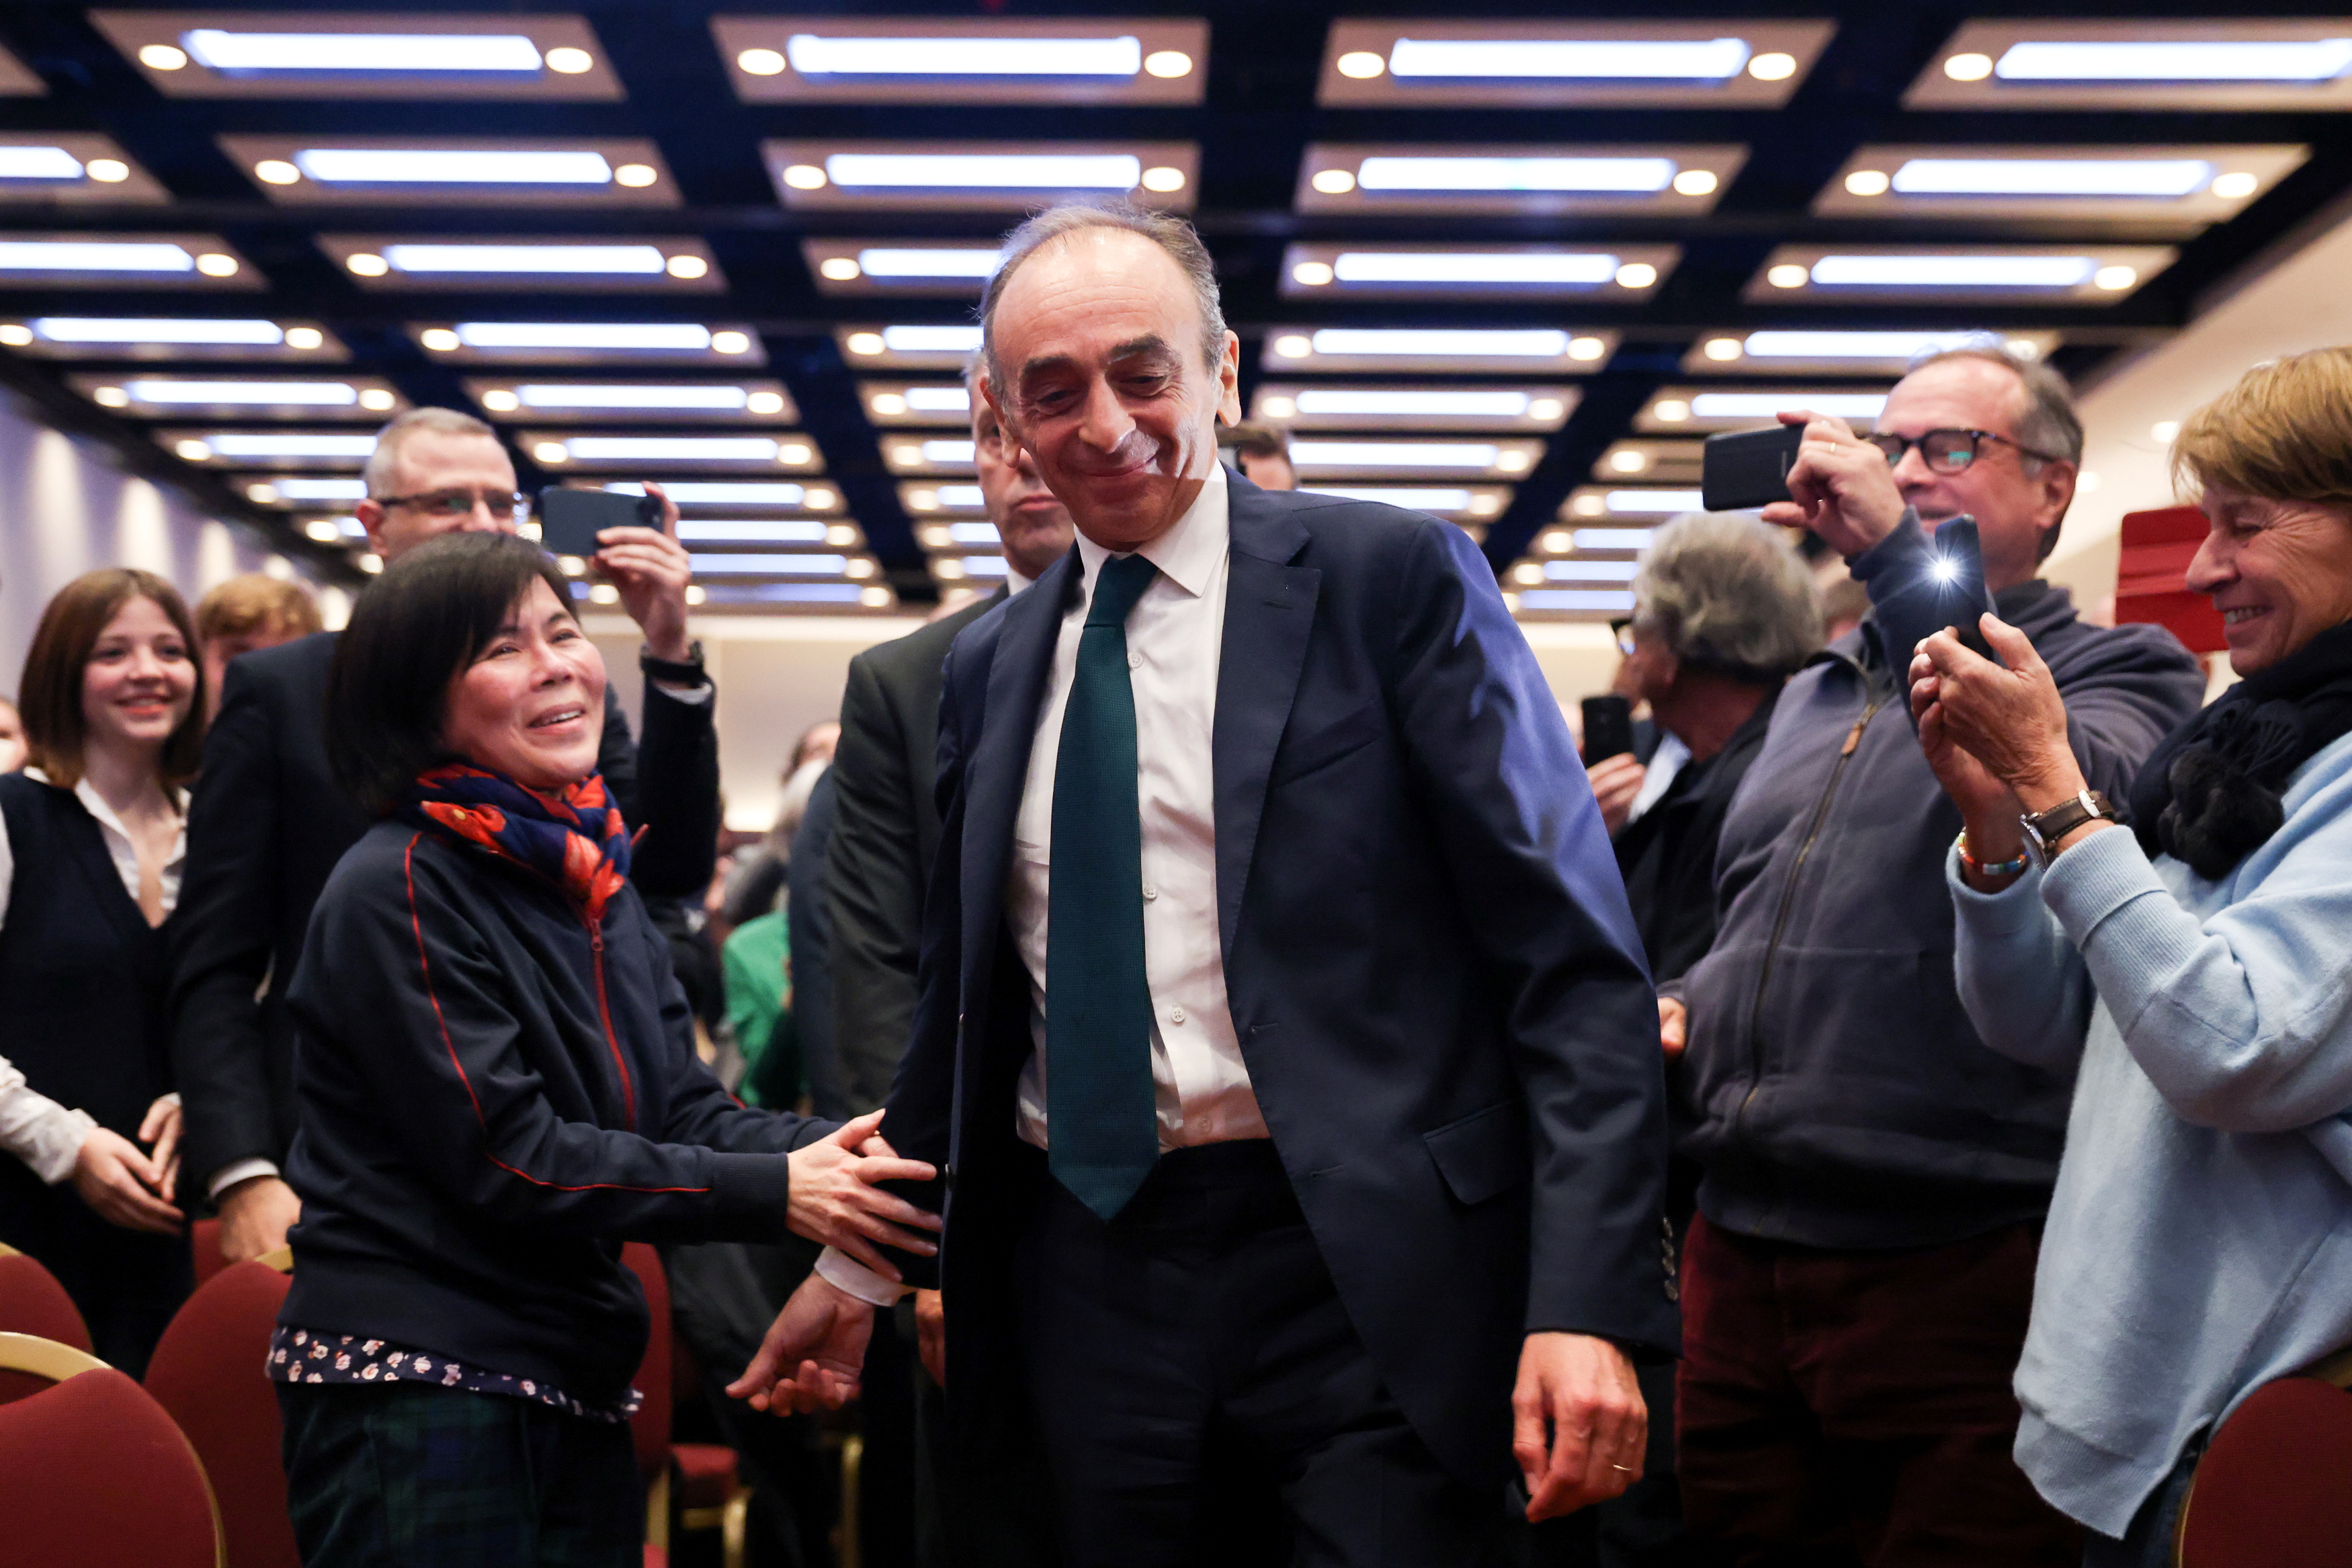 French right-wing commentator Eric Zemmour arrives before making a speech at an event at the ILEC conference centre, London, Britain, November 19, 2021. REUTERS/Tom Nicholson